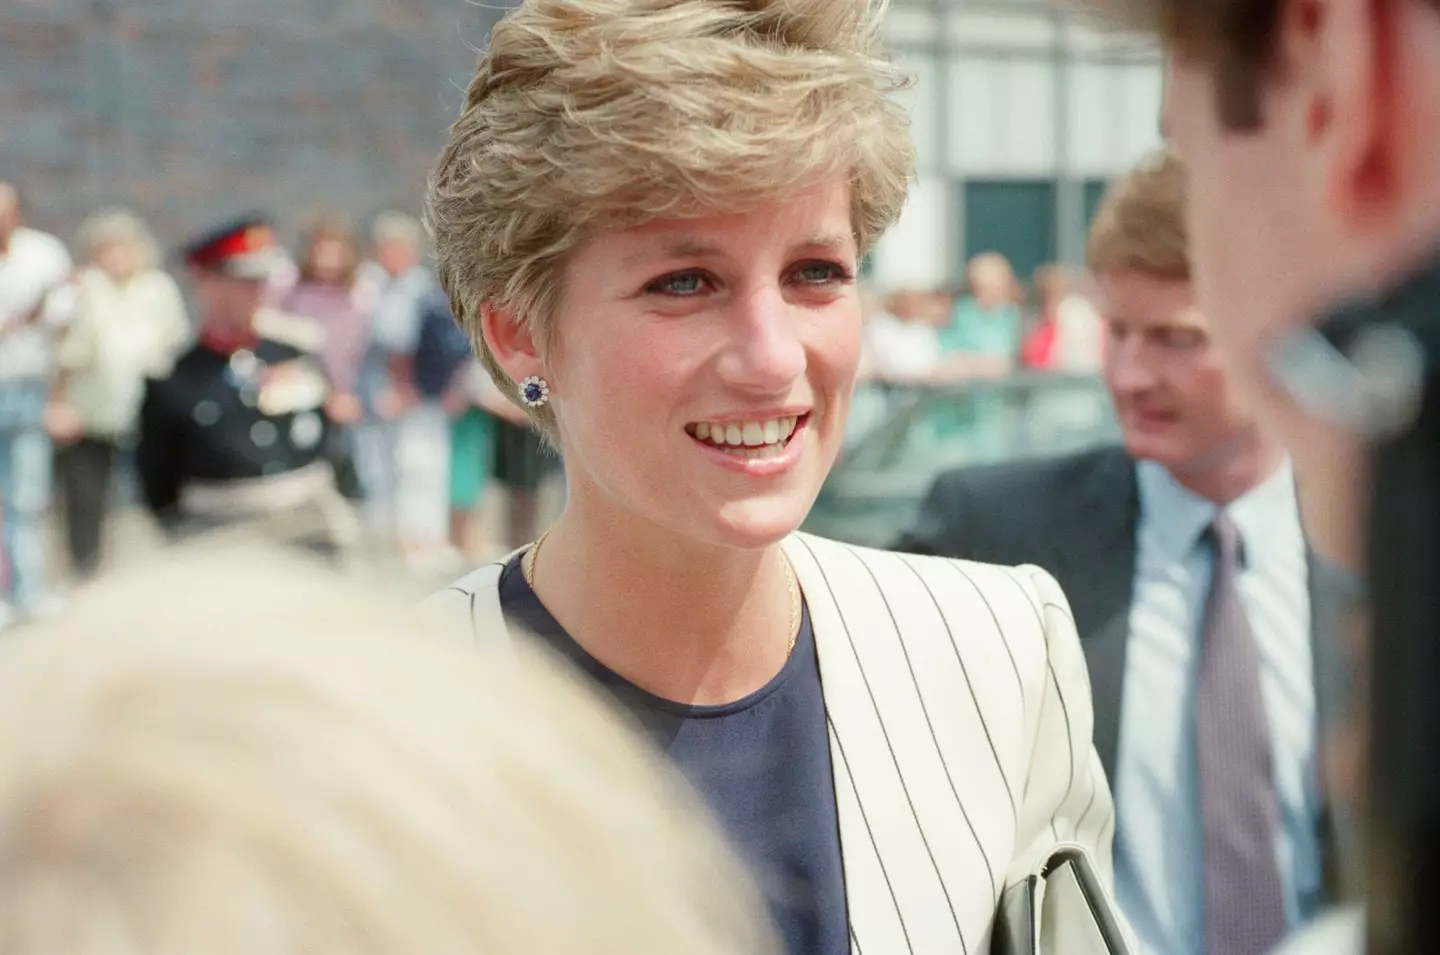 The cross was worn by Princess Diana on multiple occasions.